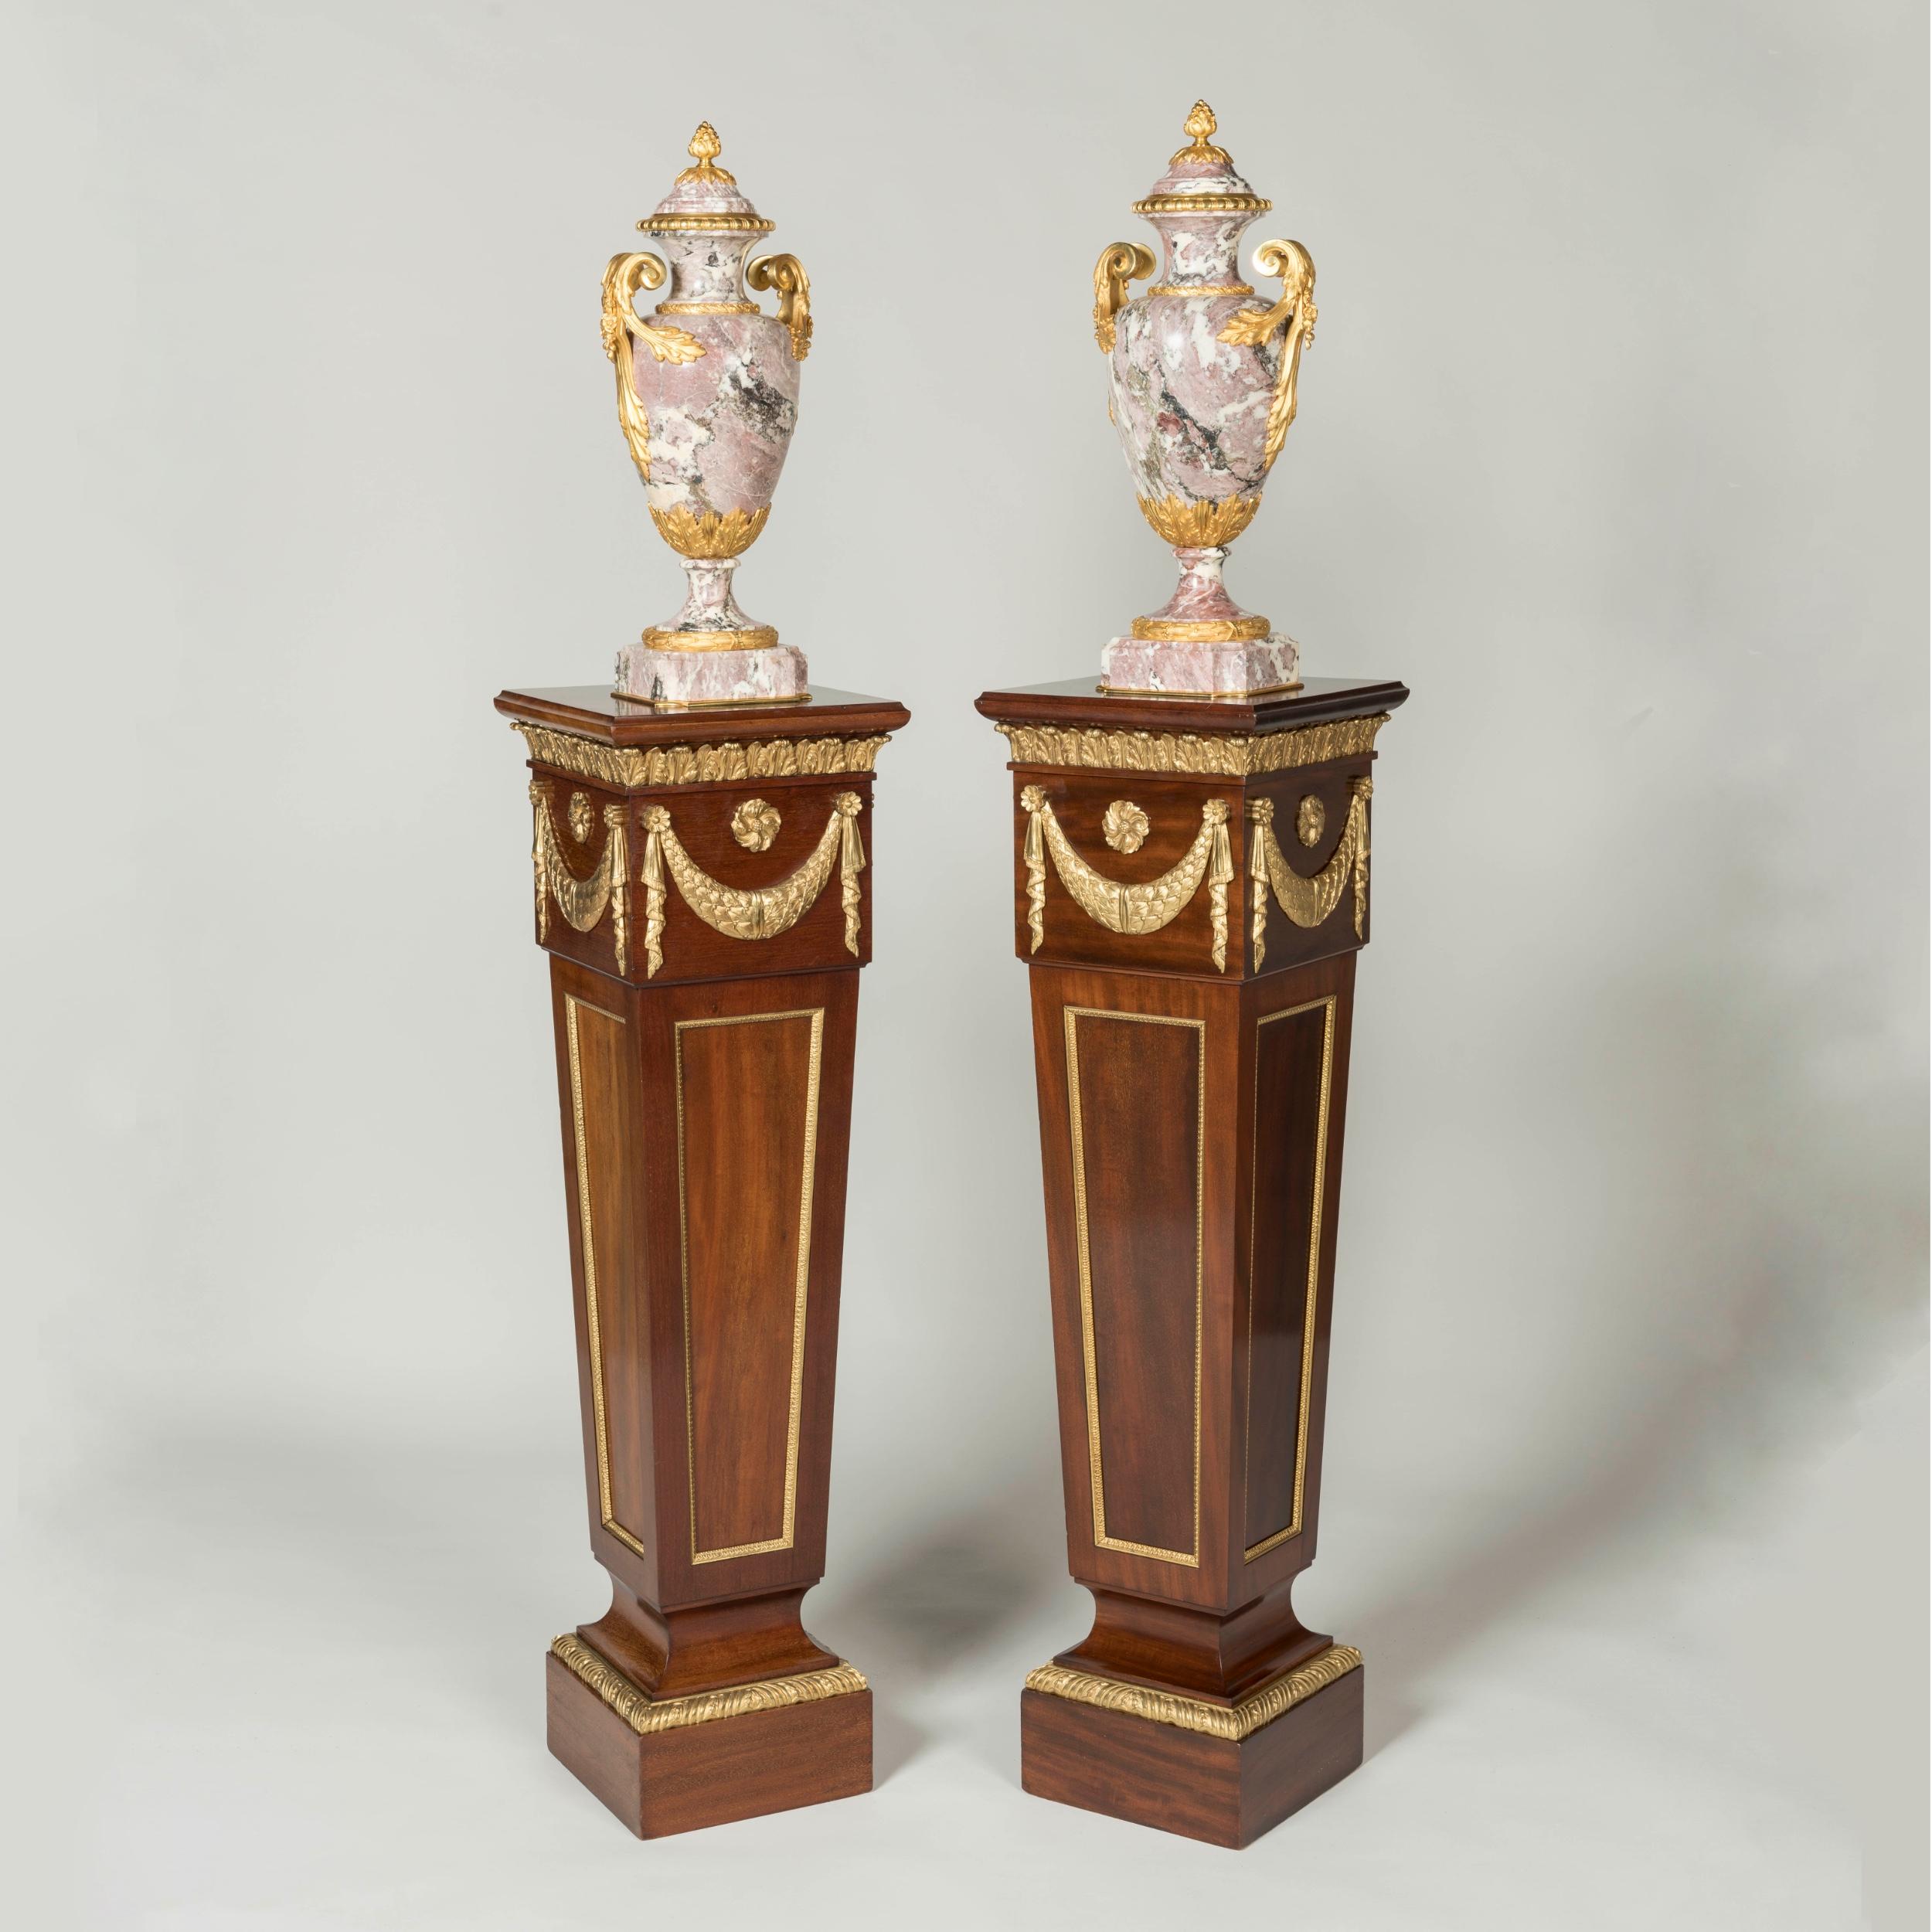 A pair of Ormolu-mounted pedestals
by Trollope & Sons

Constructed using rich mahogany, the pair of pedestals of square cross section on plinth supports, of slight taper form with the fascia of recessed panels and stiff-leaf moulding, with